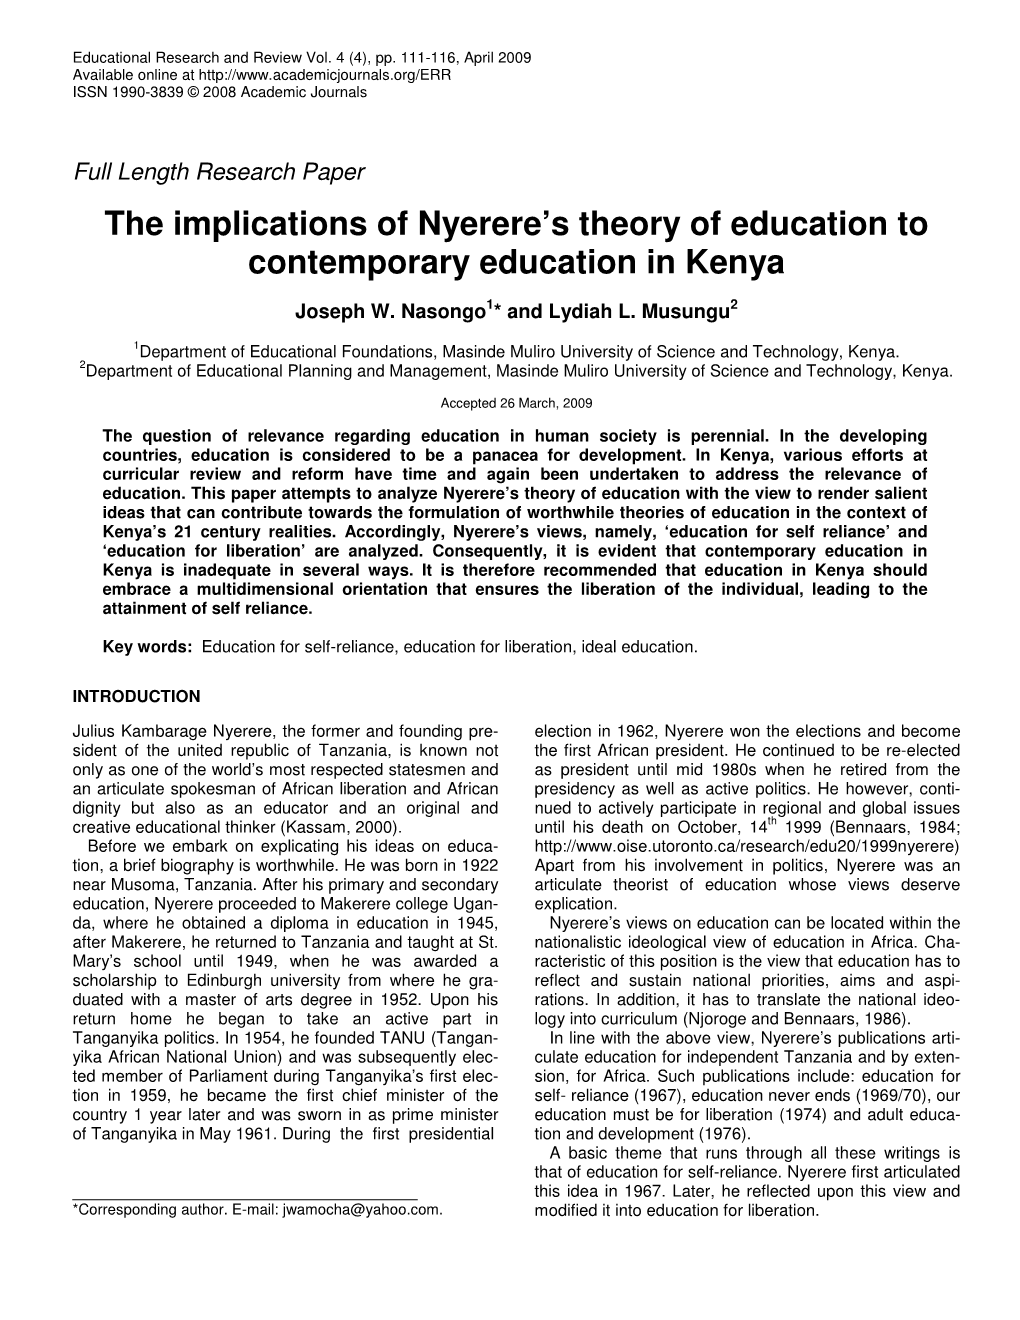 The Implications of Nyerere's Theory of Education to Contemporary